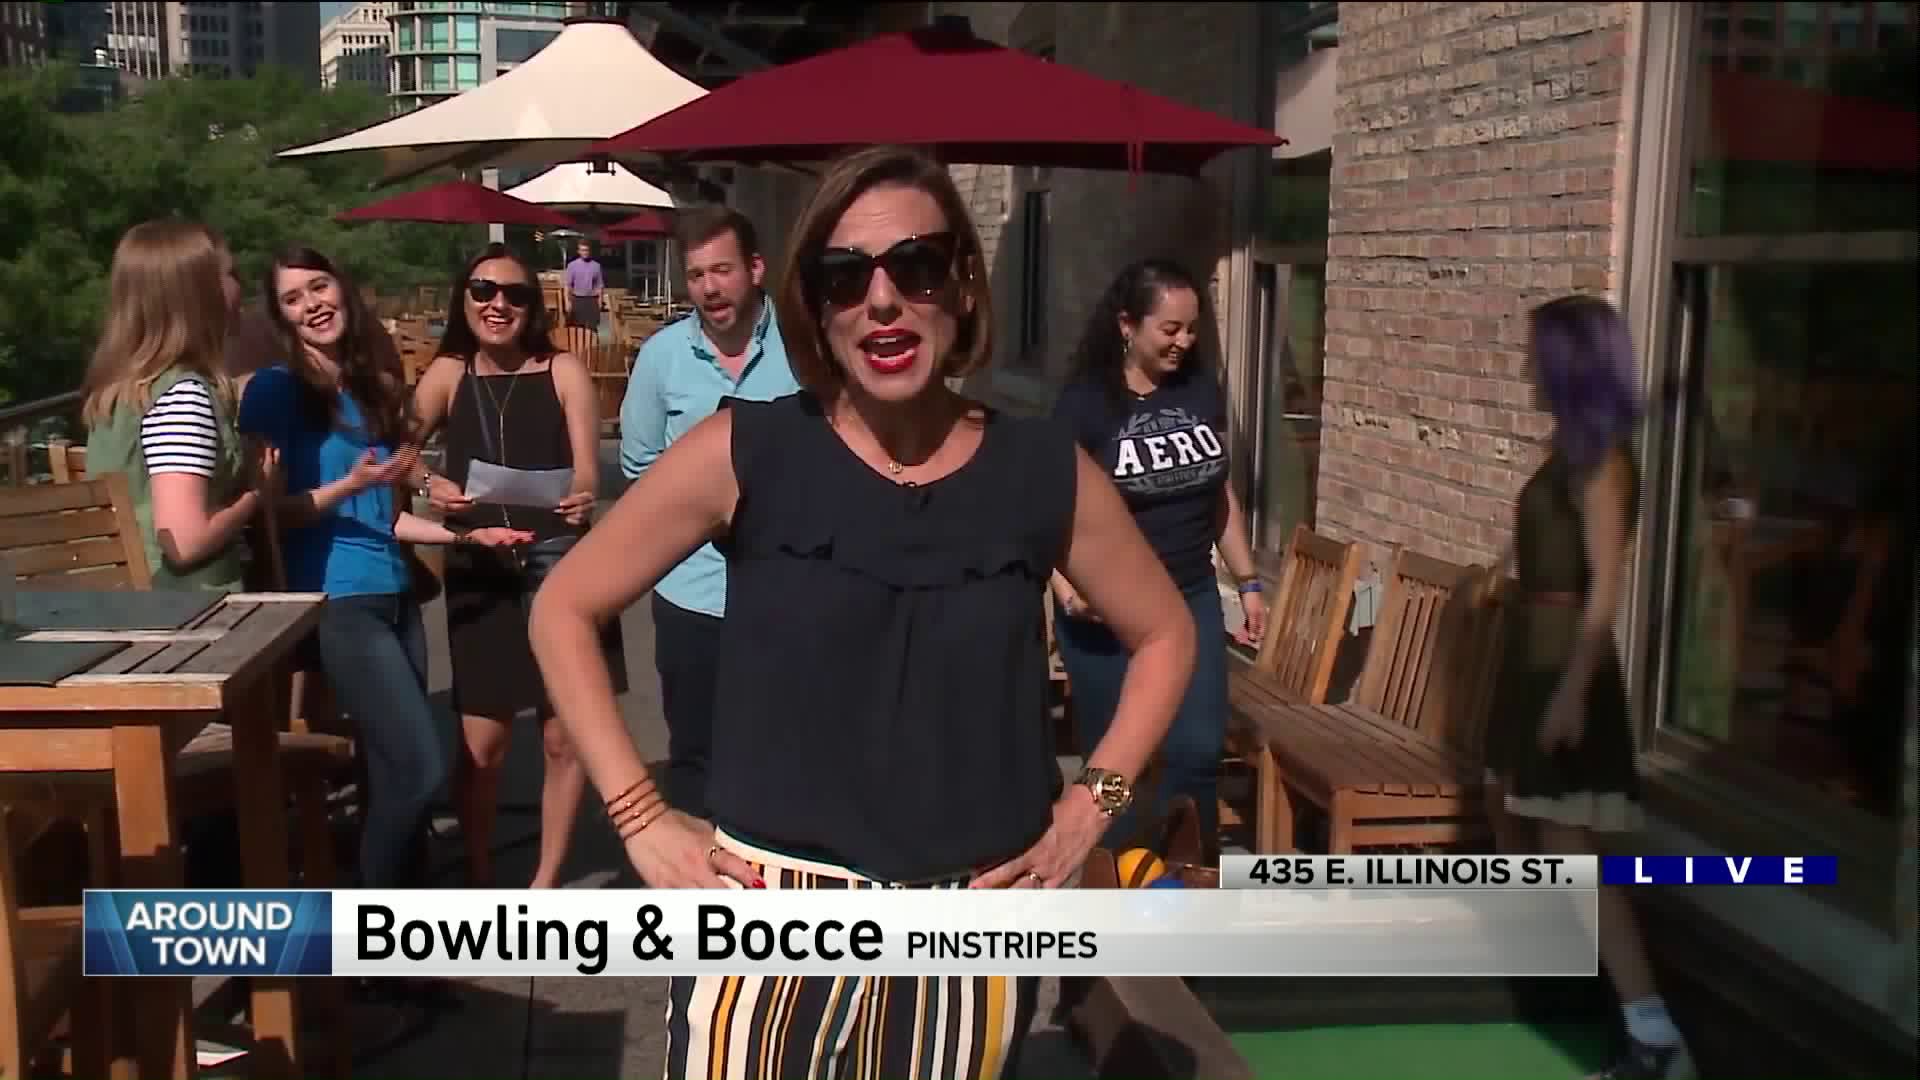 Around Town helps celebrate National Bowling & Bocce Day at Pinstripes